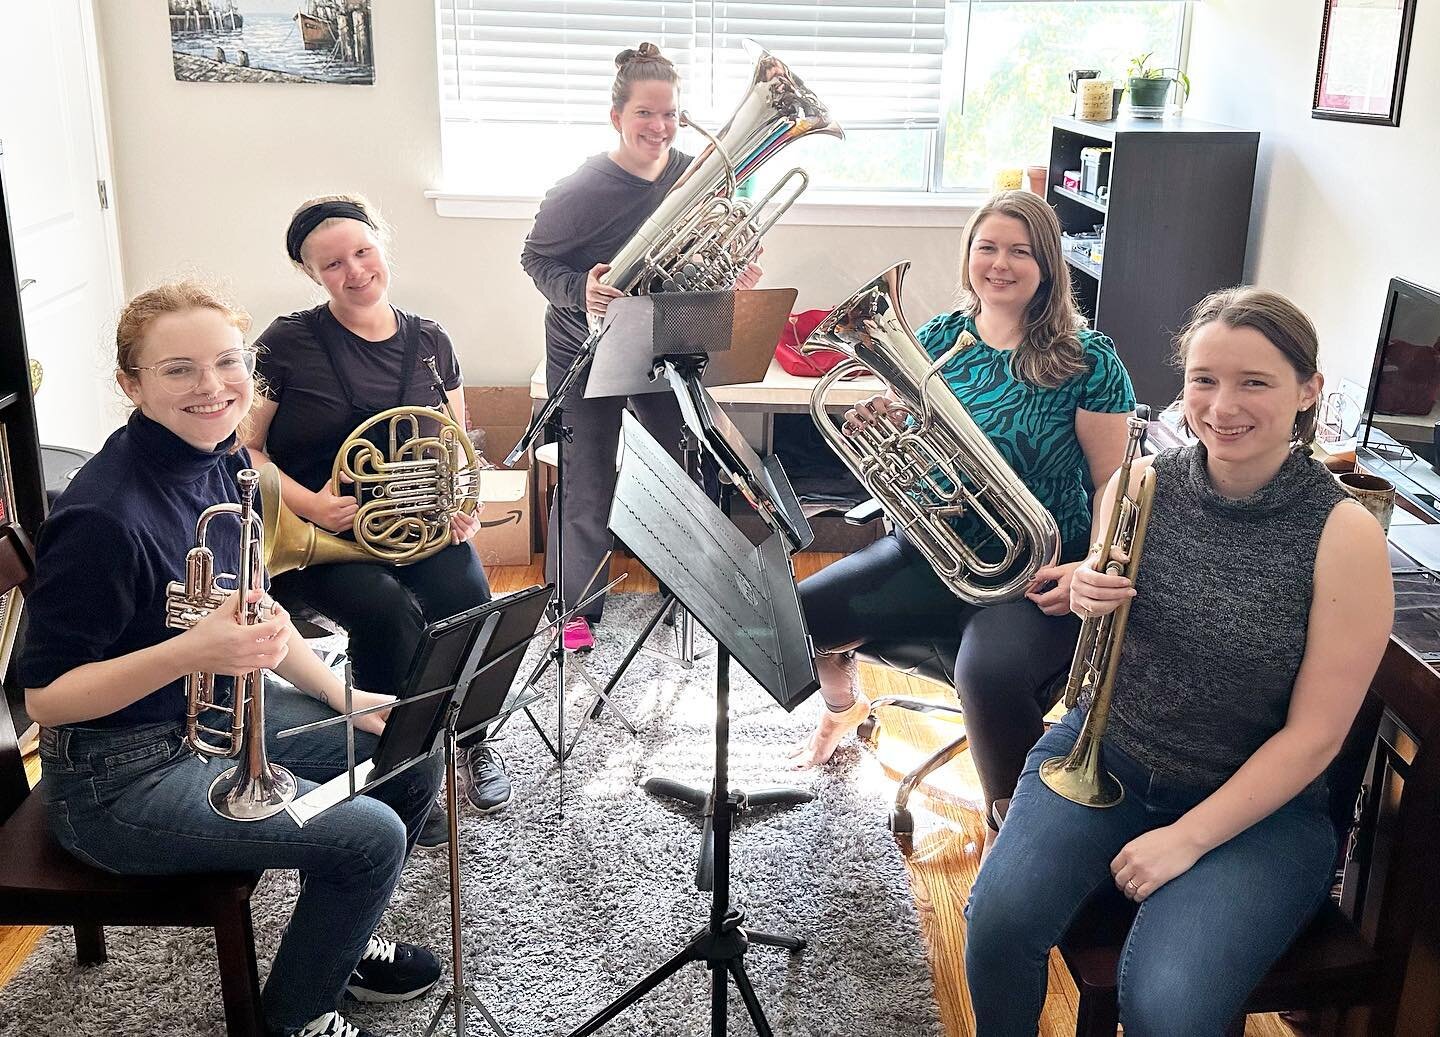 Coda Brass rehearsals are the best! We can&rsquo;t wait to share some sounds with you! 🎶